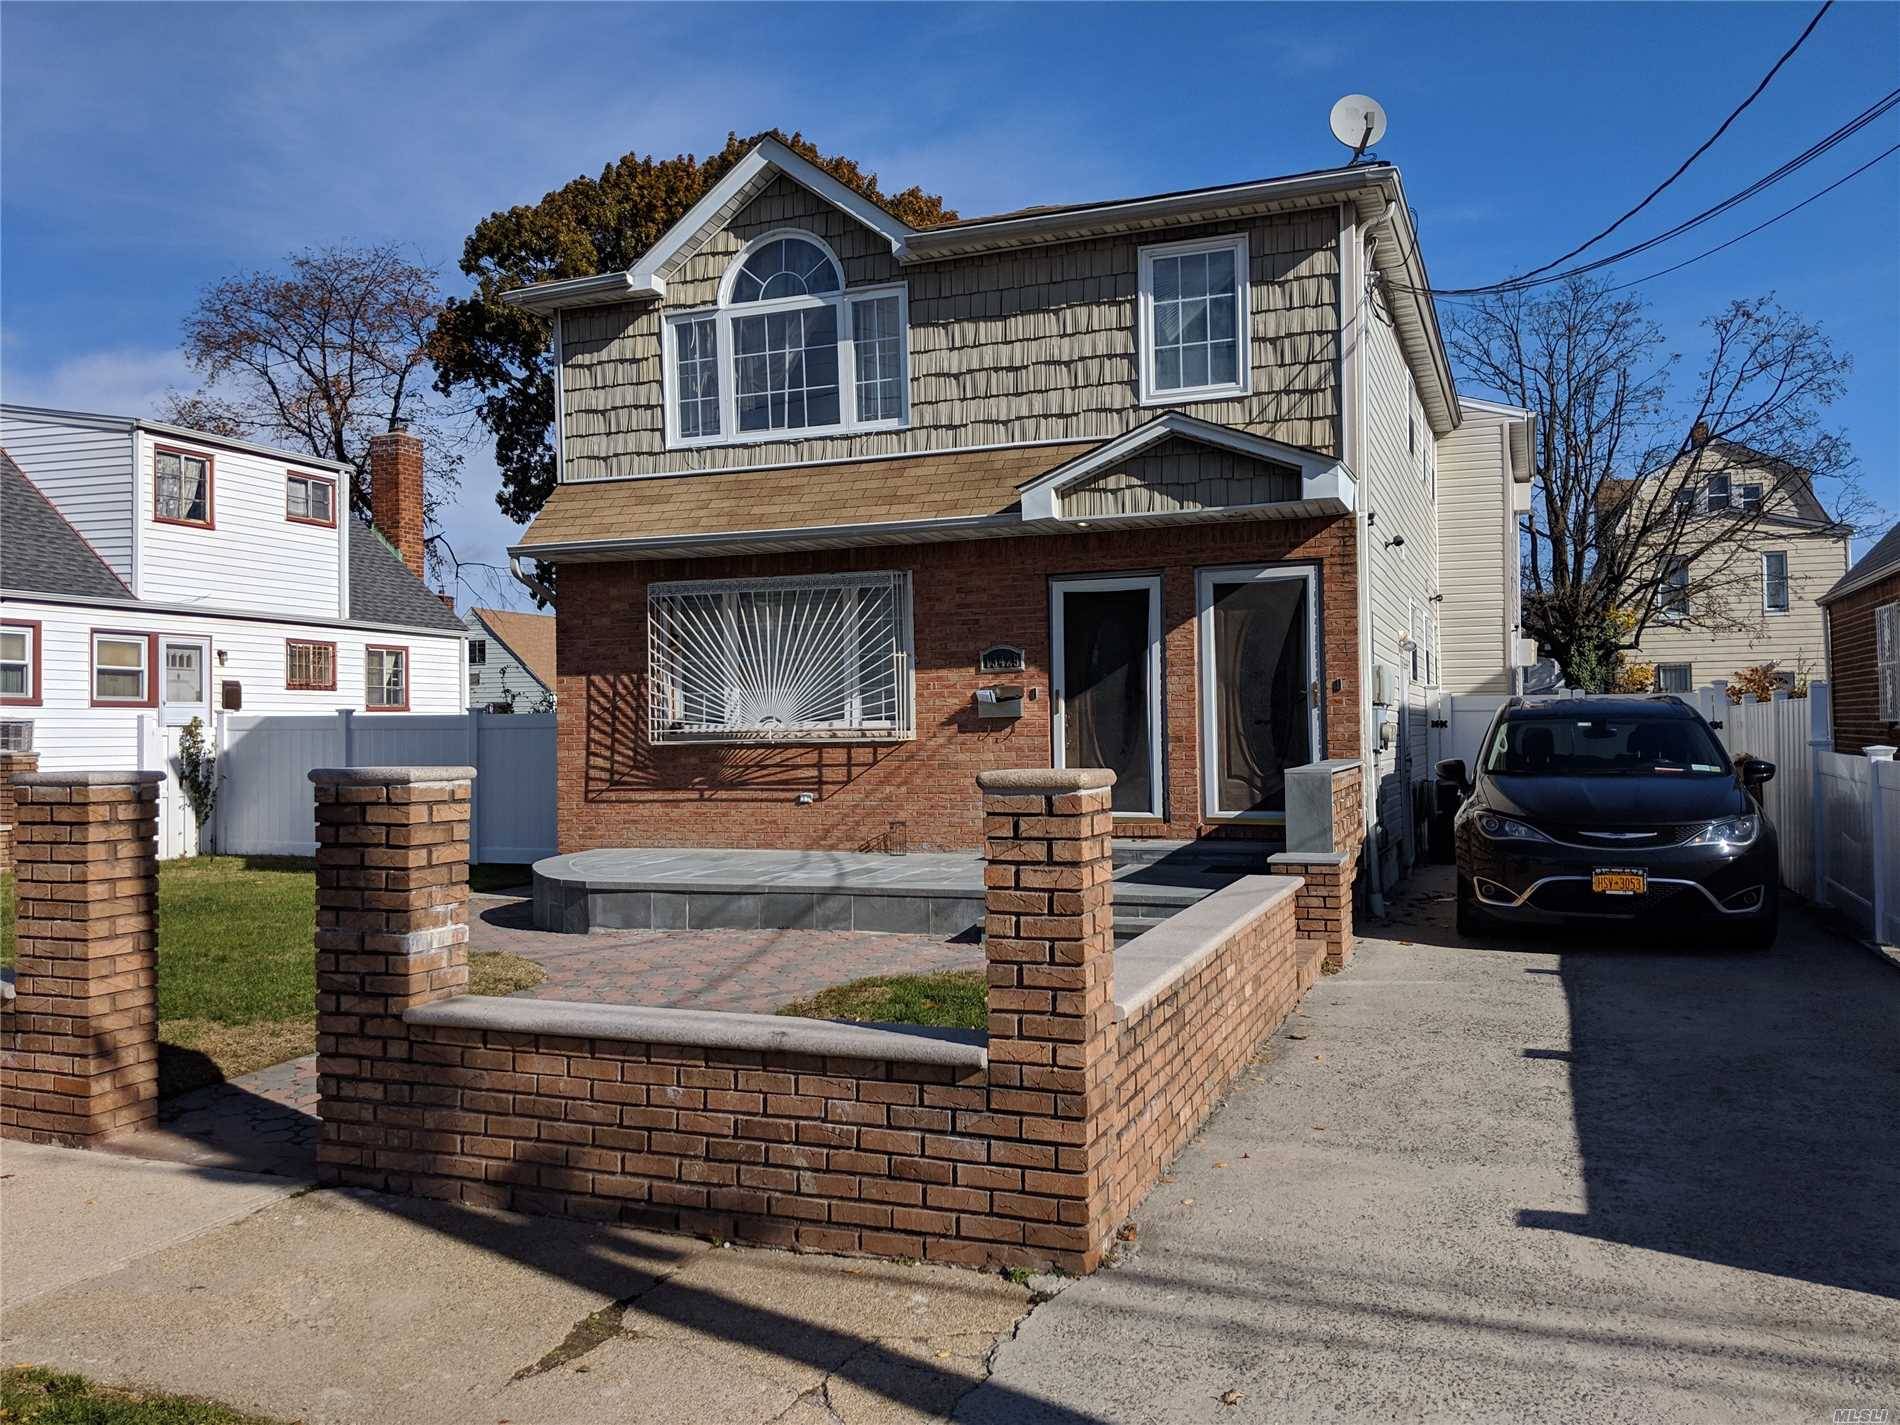 Detached 2 Family House With A Large Backyard And Private Driveway For 3 Car Parking Spaces.